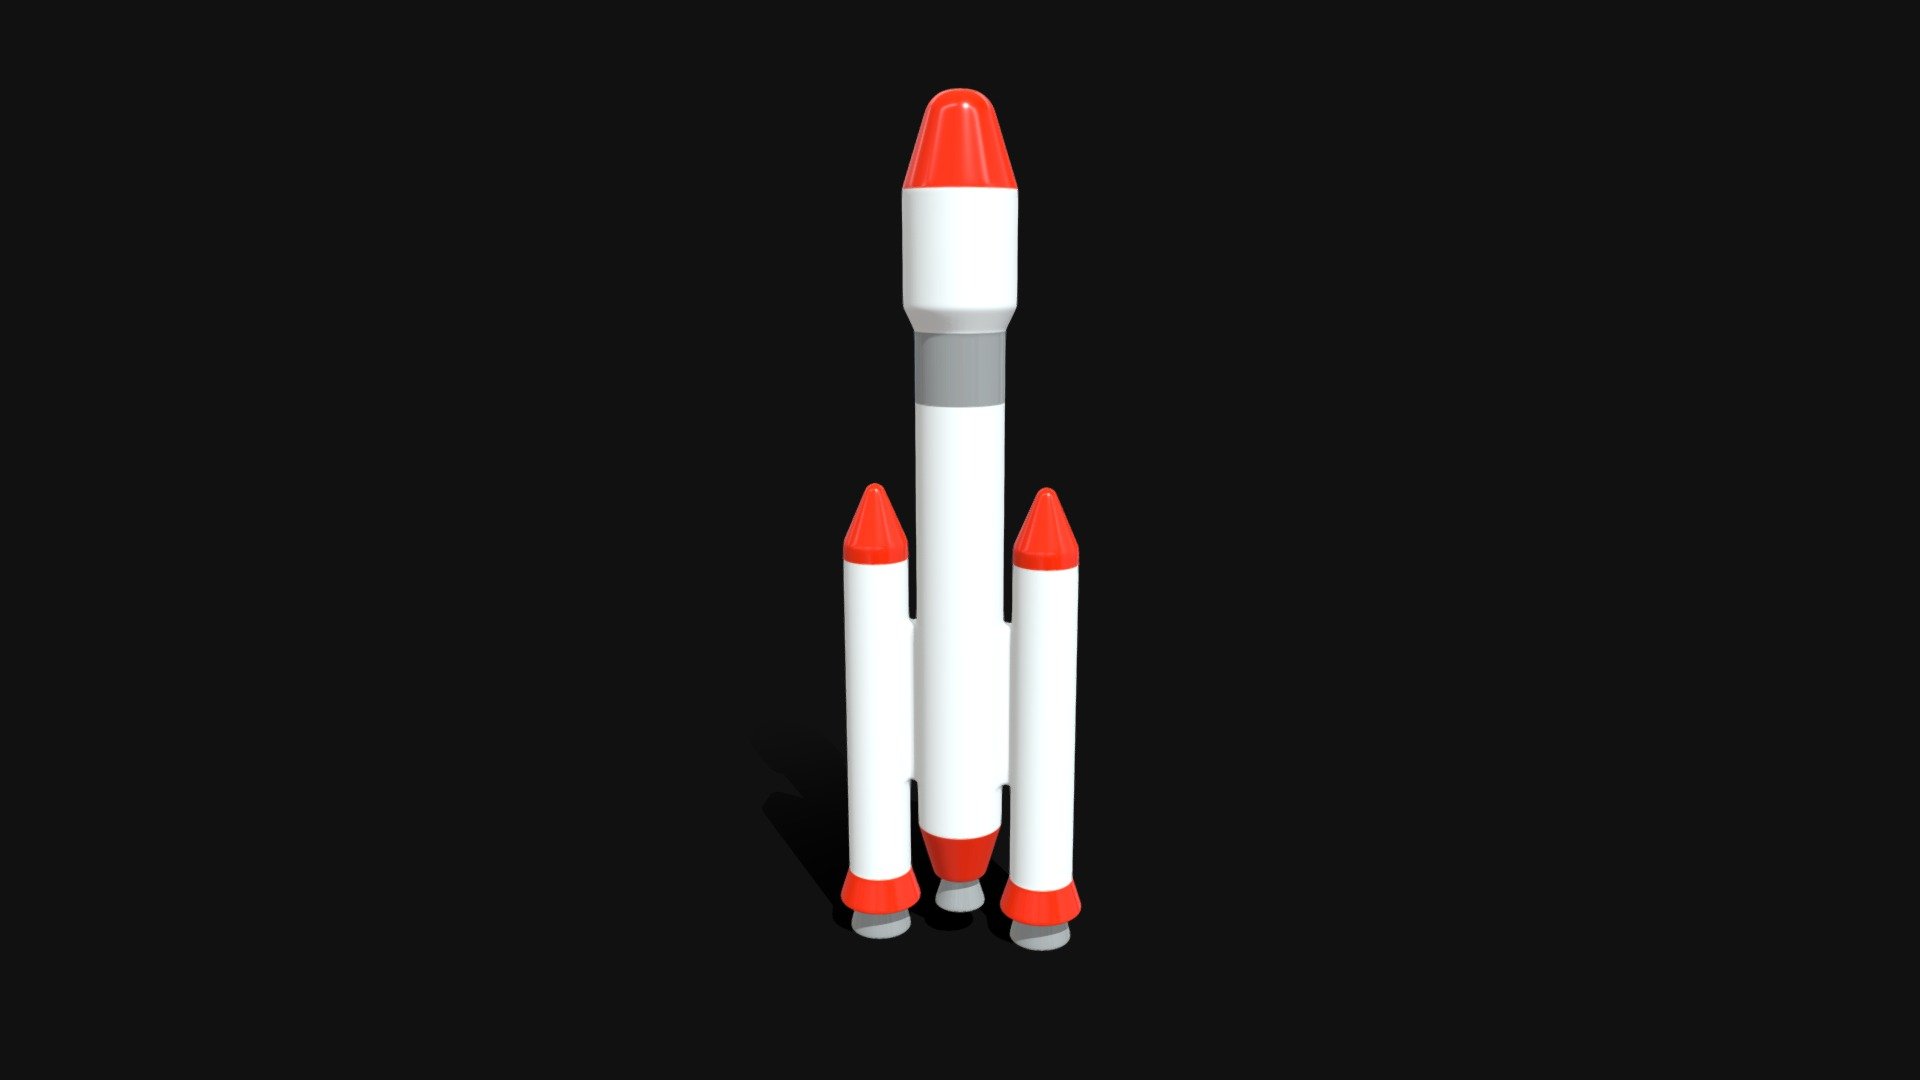 Space Rocket Low Poly Icon Style.
Only quad polygons with correct topology, supports multiple subdivisions.
Archive file contains: .c4d, .fbx, .obj, .mtl, .stl + textures.

! For better results please use subdivision surface without UV smoothing ! - Space Rocket 8 - 3D model by Andrey Sannikov (@ritordp) 3d model